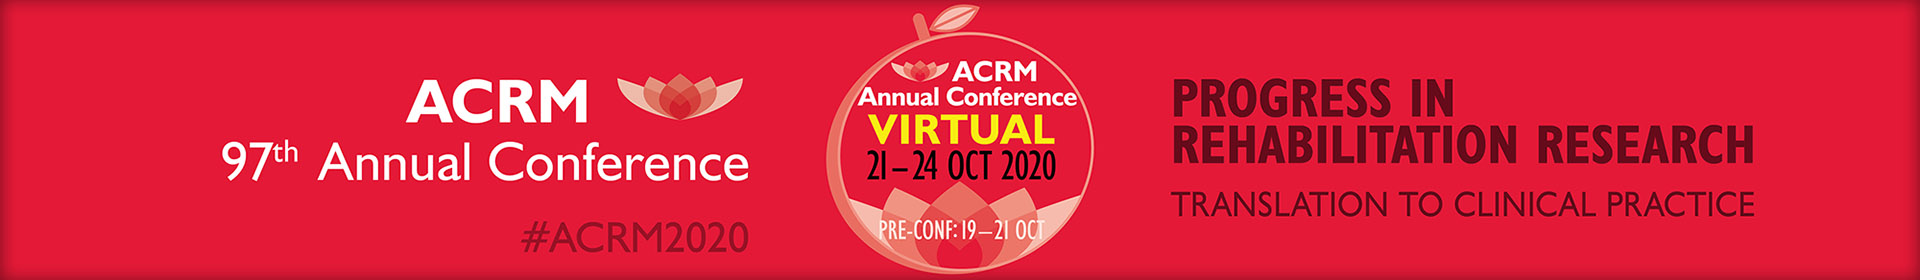 ACRM conference header